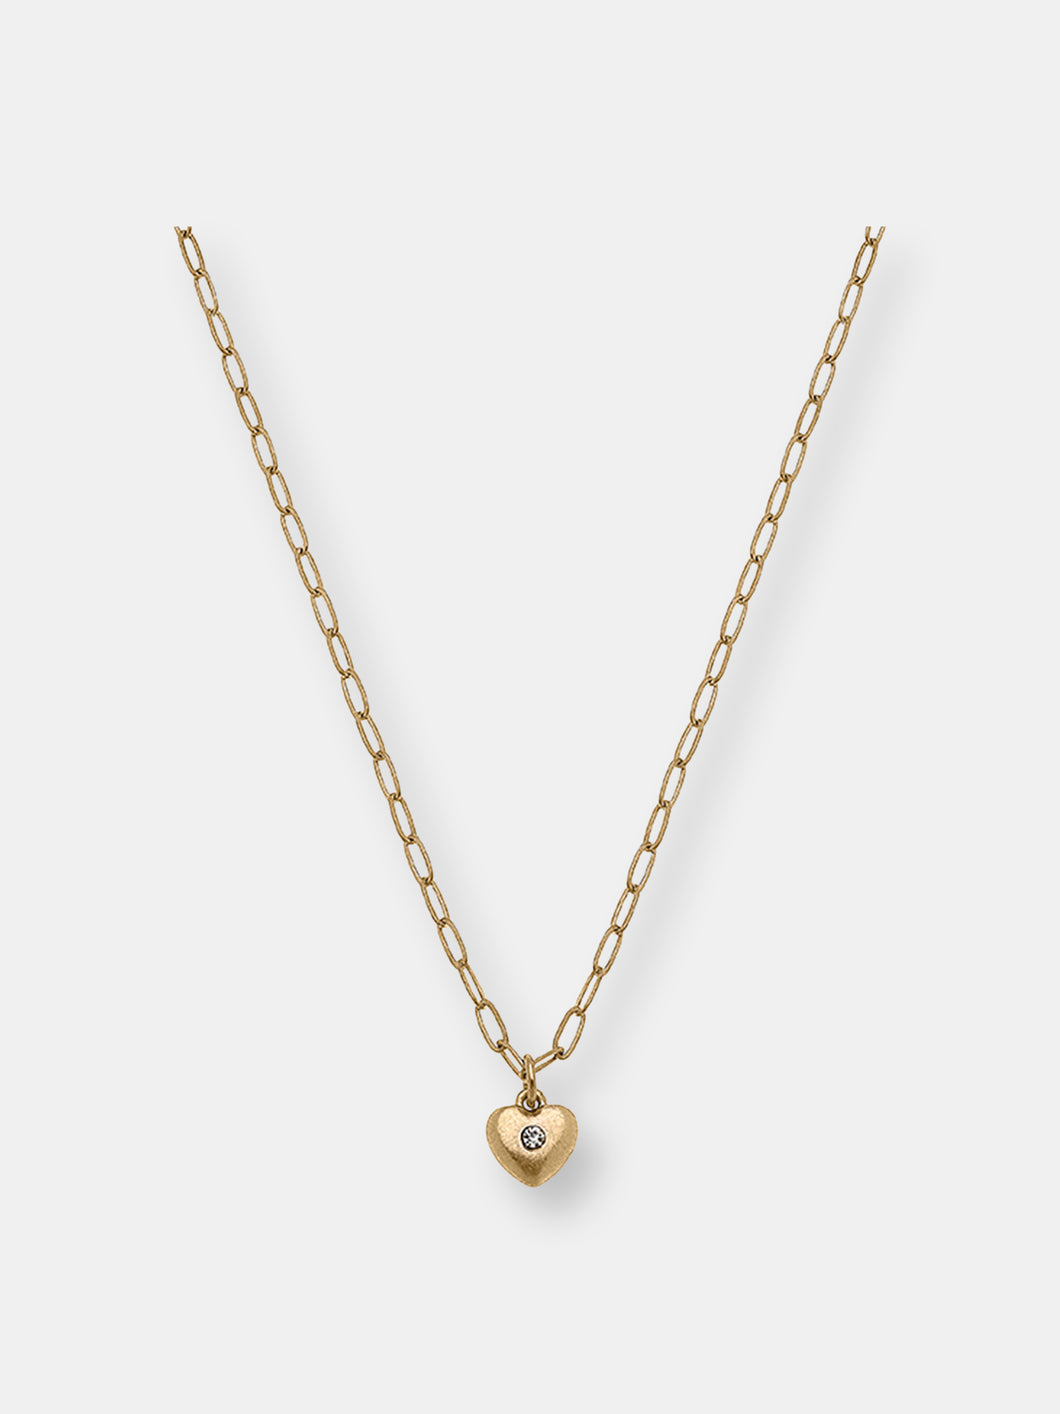 Gracie Delicate Puffed Heart Necklace in Worn Gold